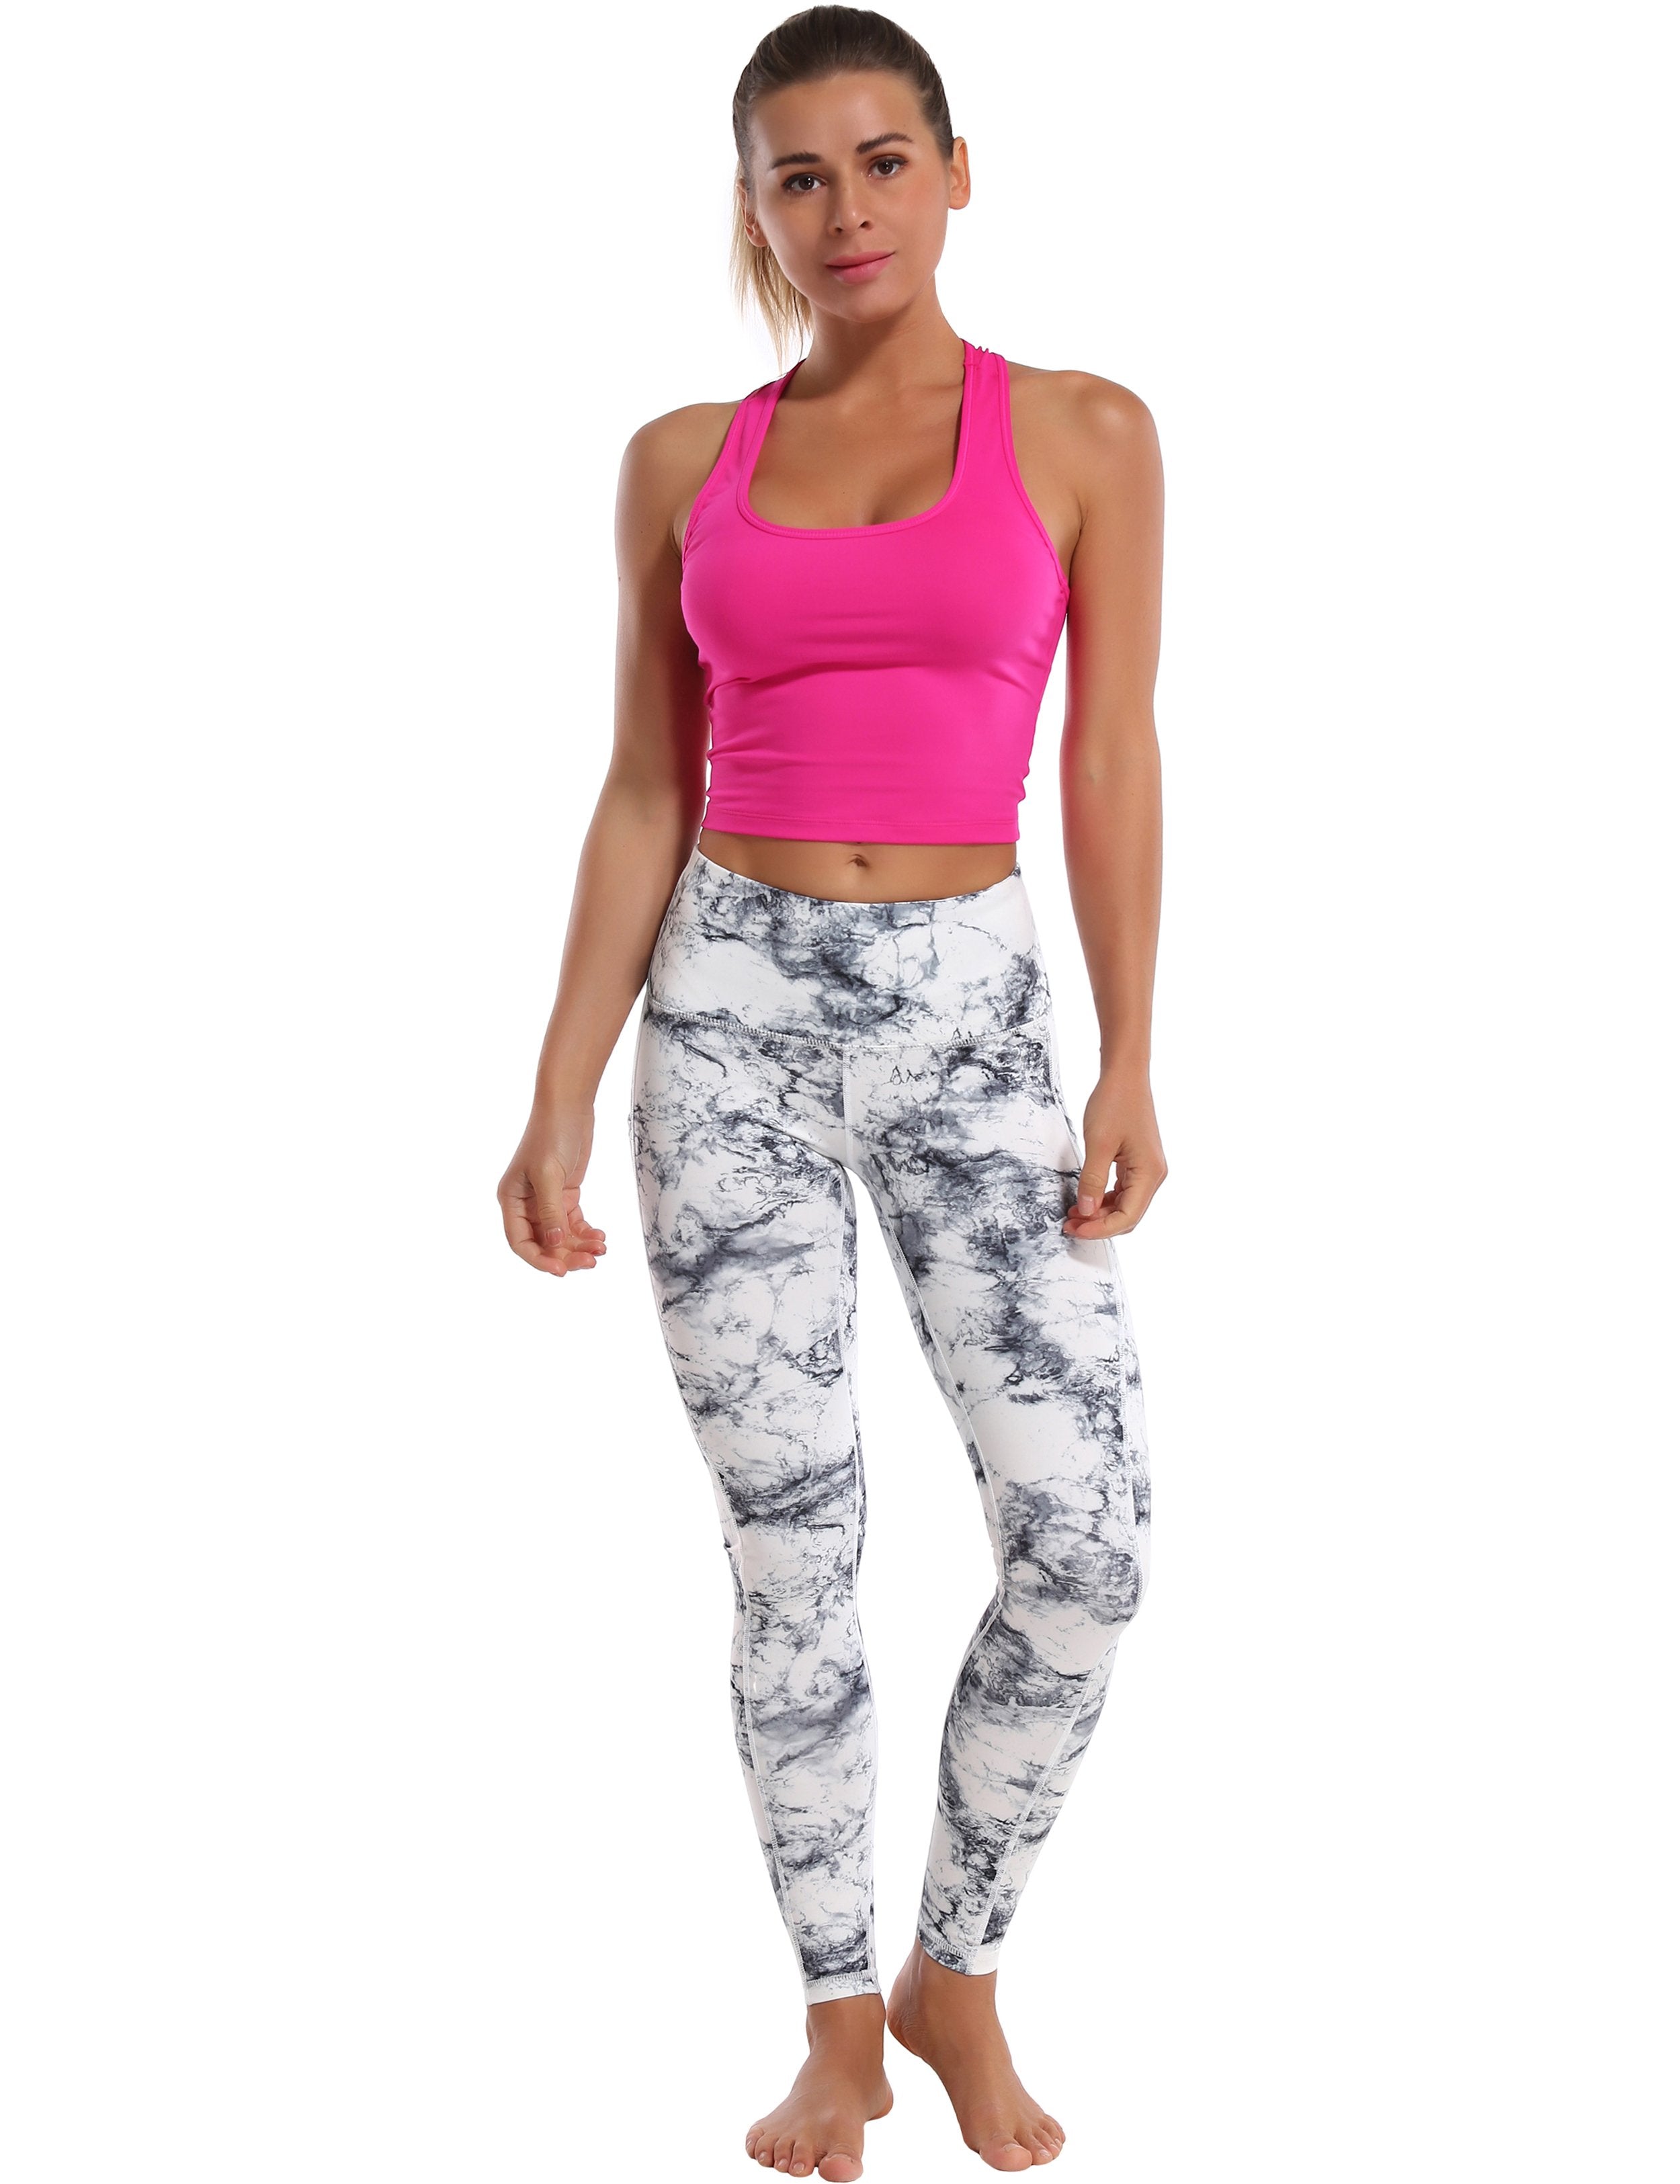 Hip Line Side Pockets Jogging Pants arabescato Sexy Hip Line Side Pockets 78%Polyester/22%Spandex Fabric doesn't attract lint easily 4-way stretch No see-through Moisture-wicking Tummy control Inner pocket